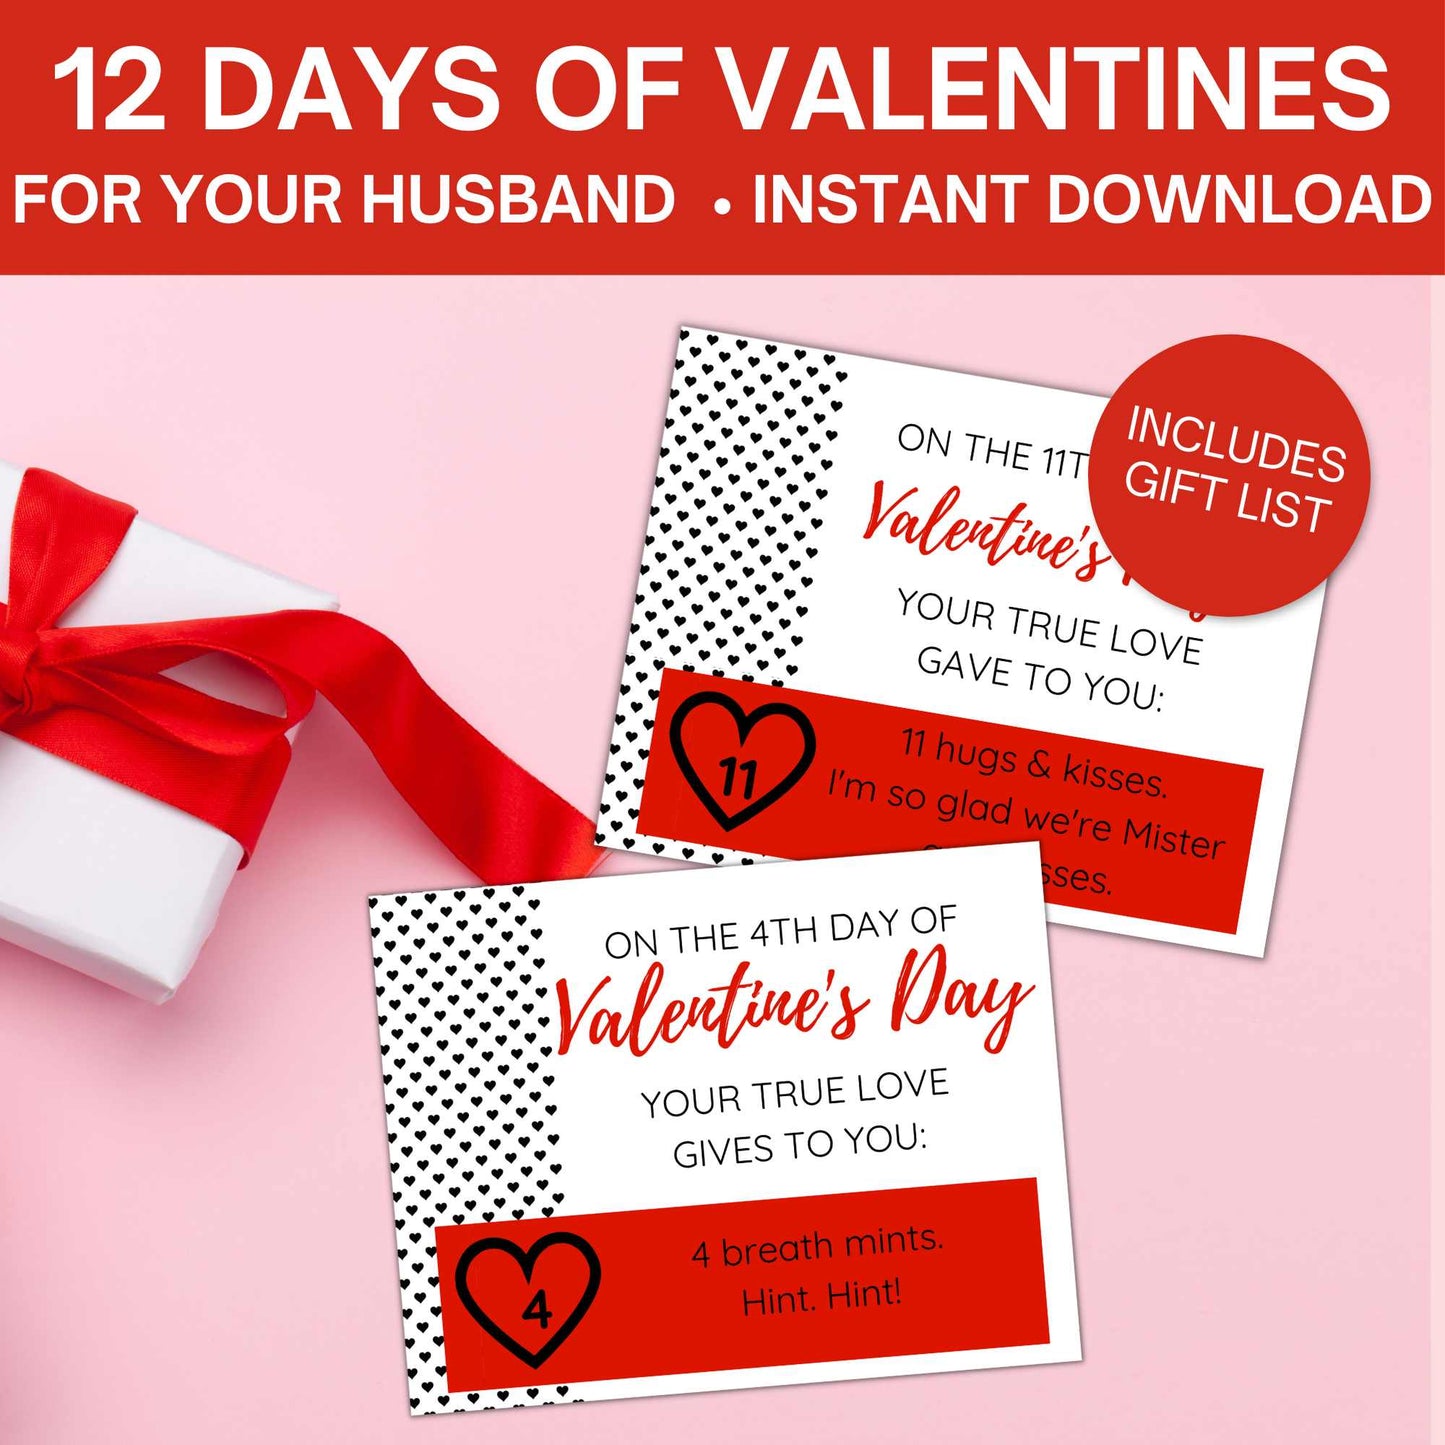 12 Days of Valentines For Your Spouse